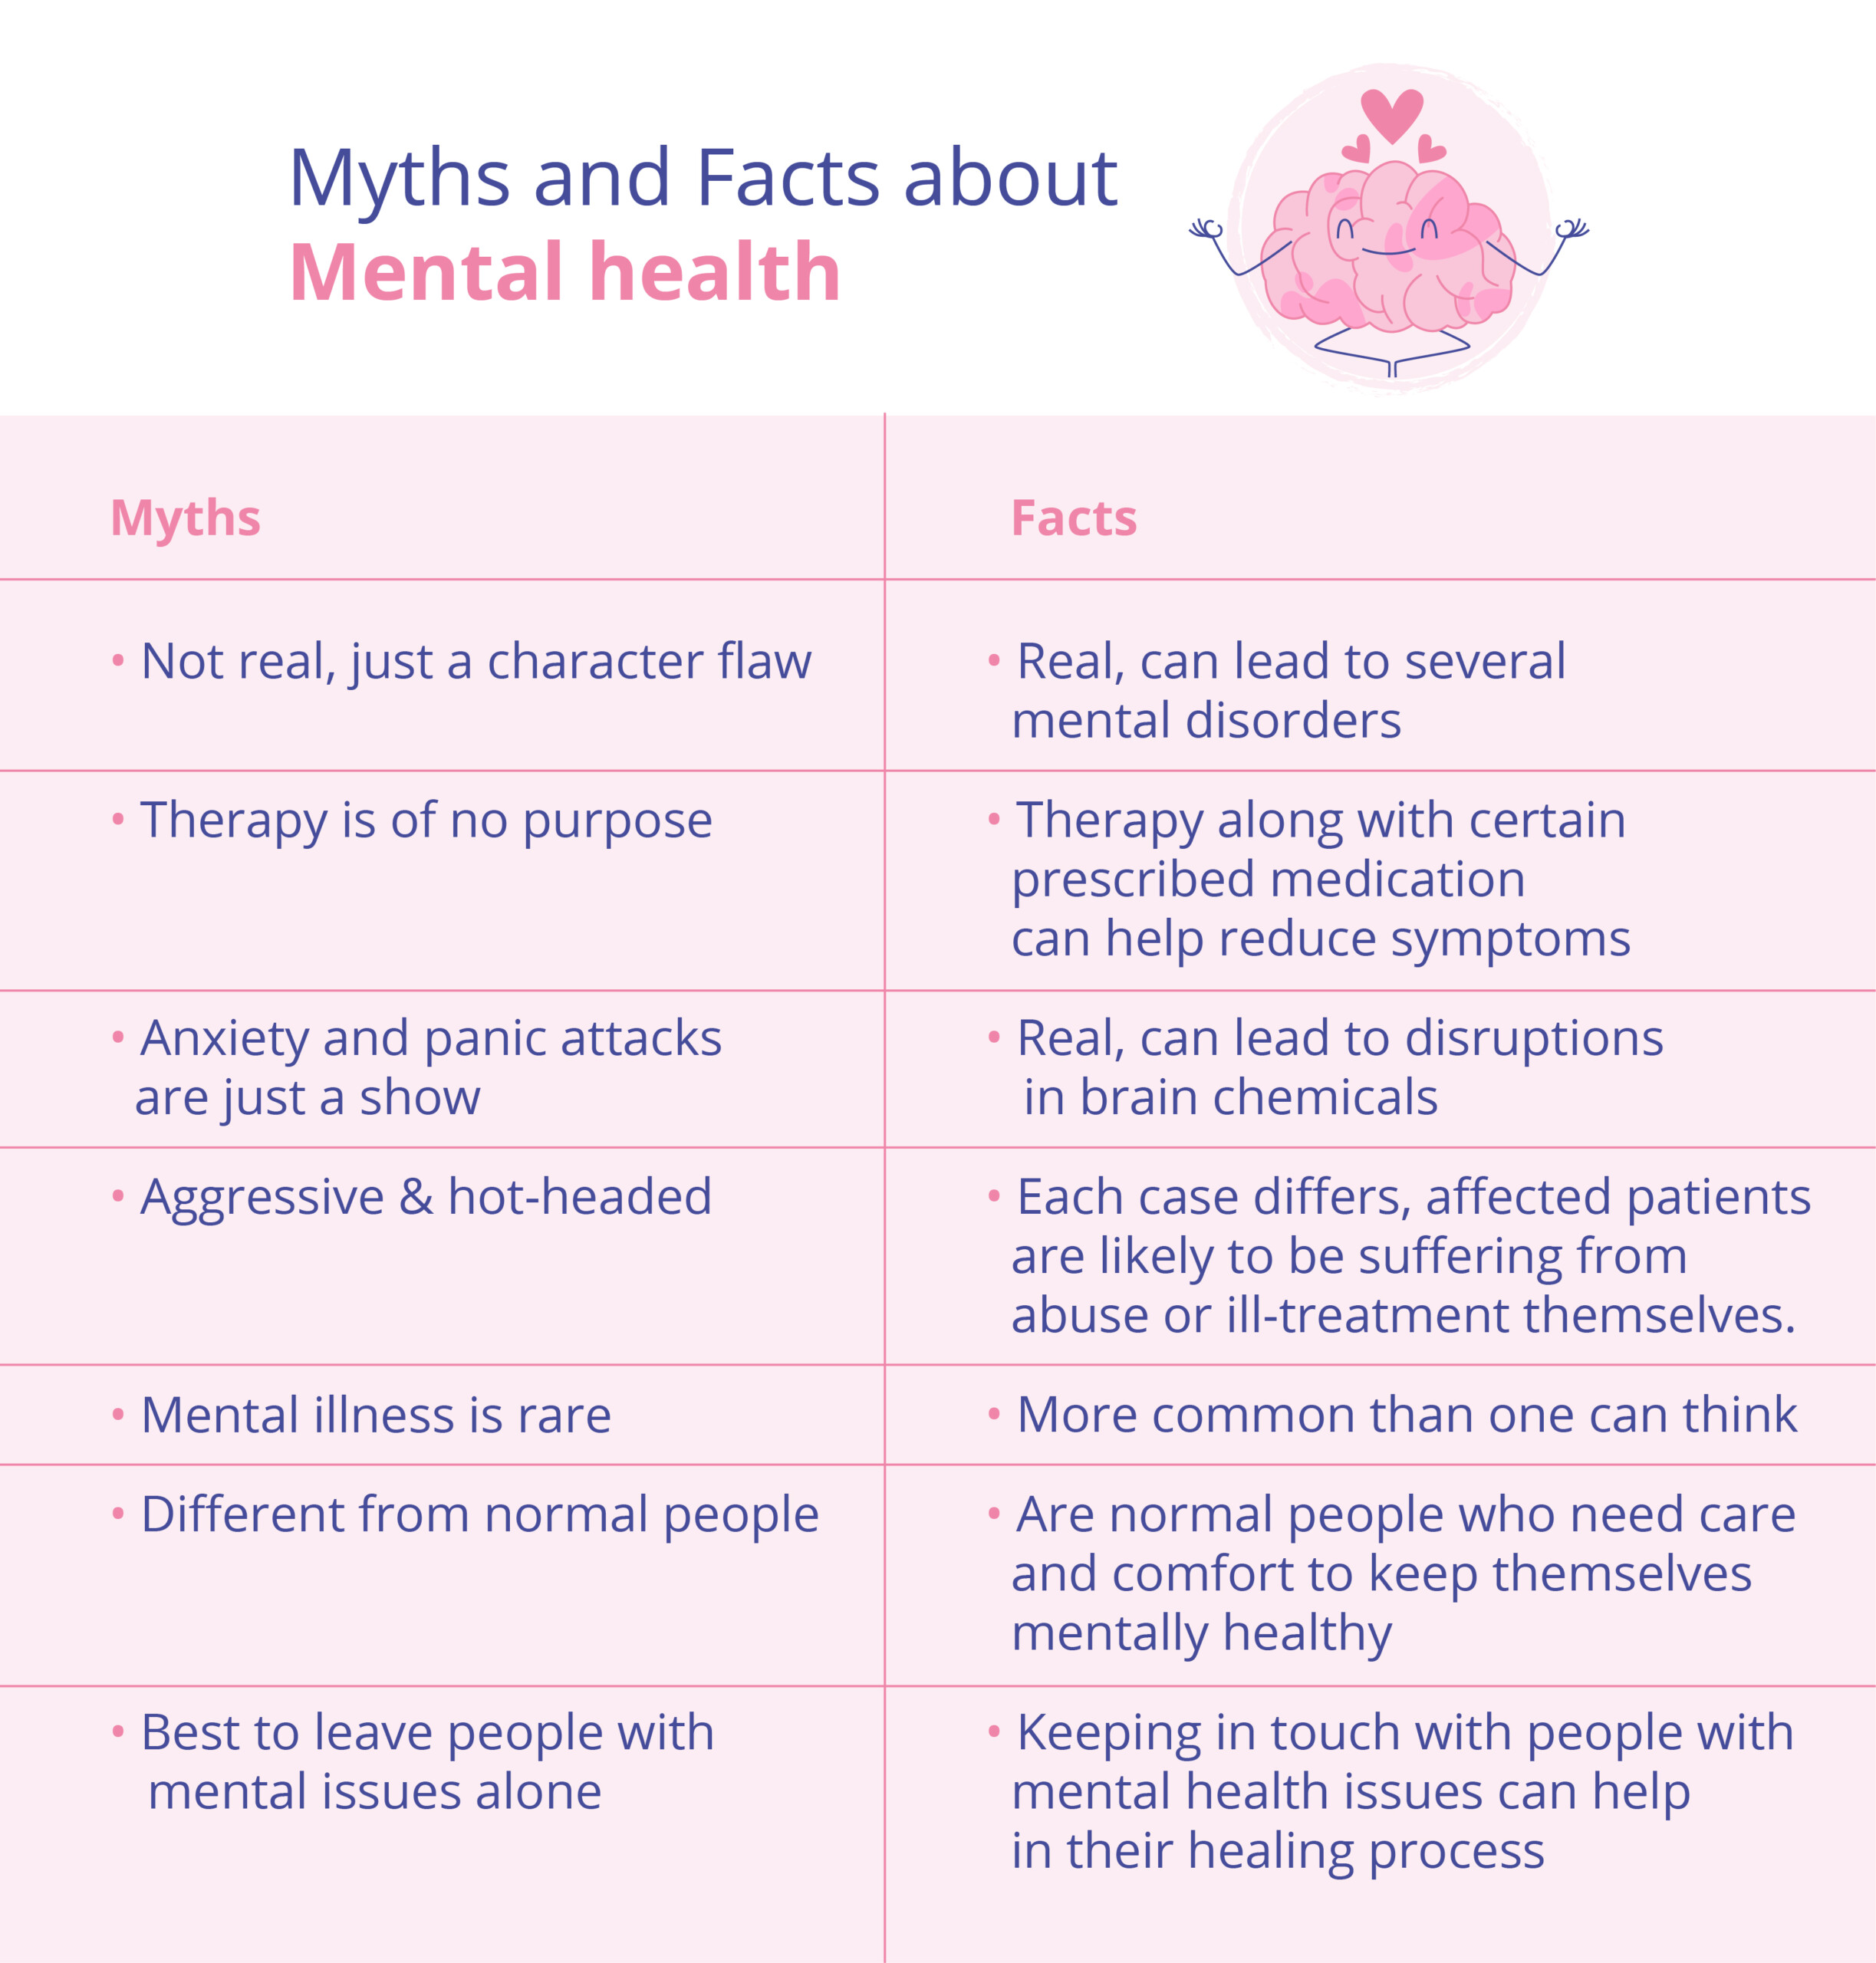 Myth and Facts about Mental health in tabular format